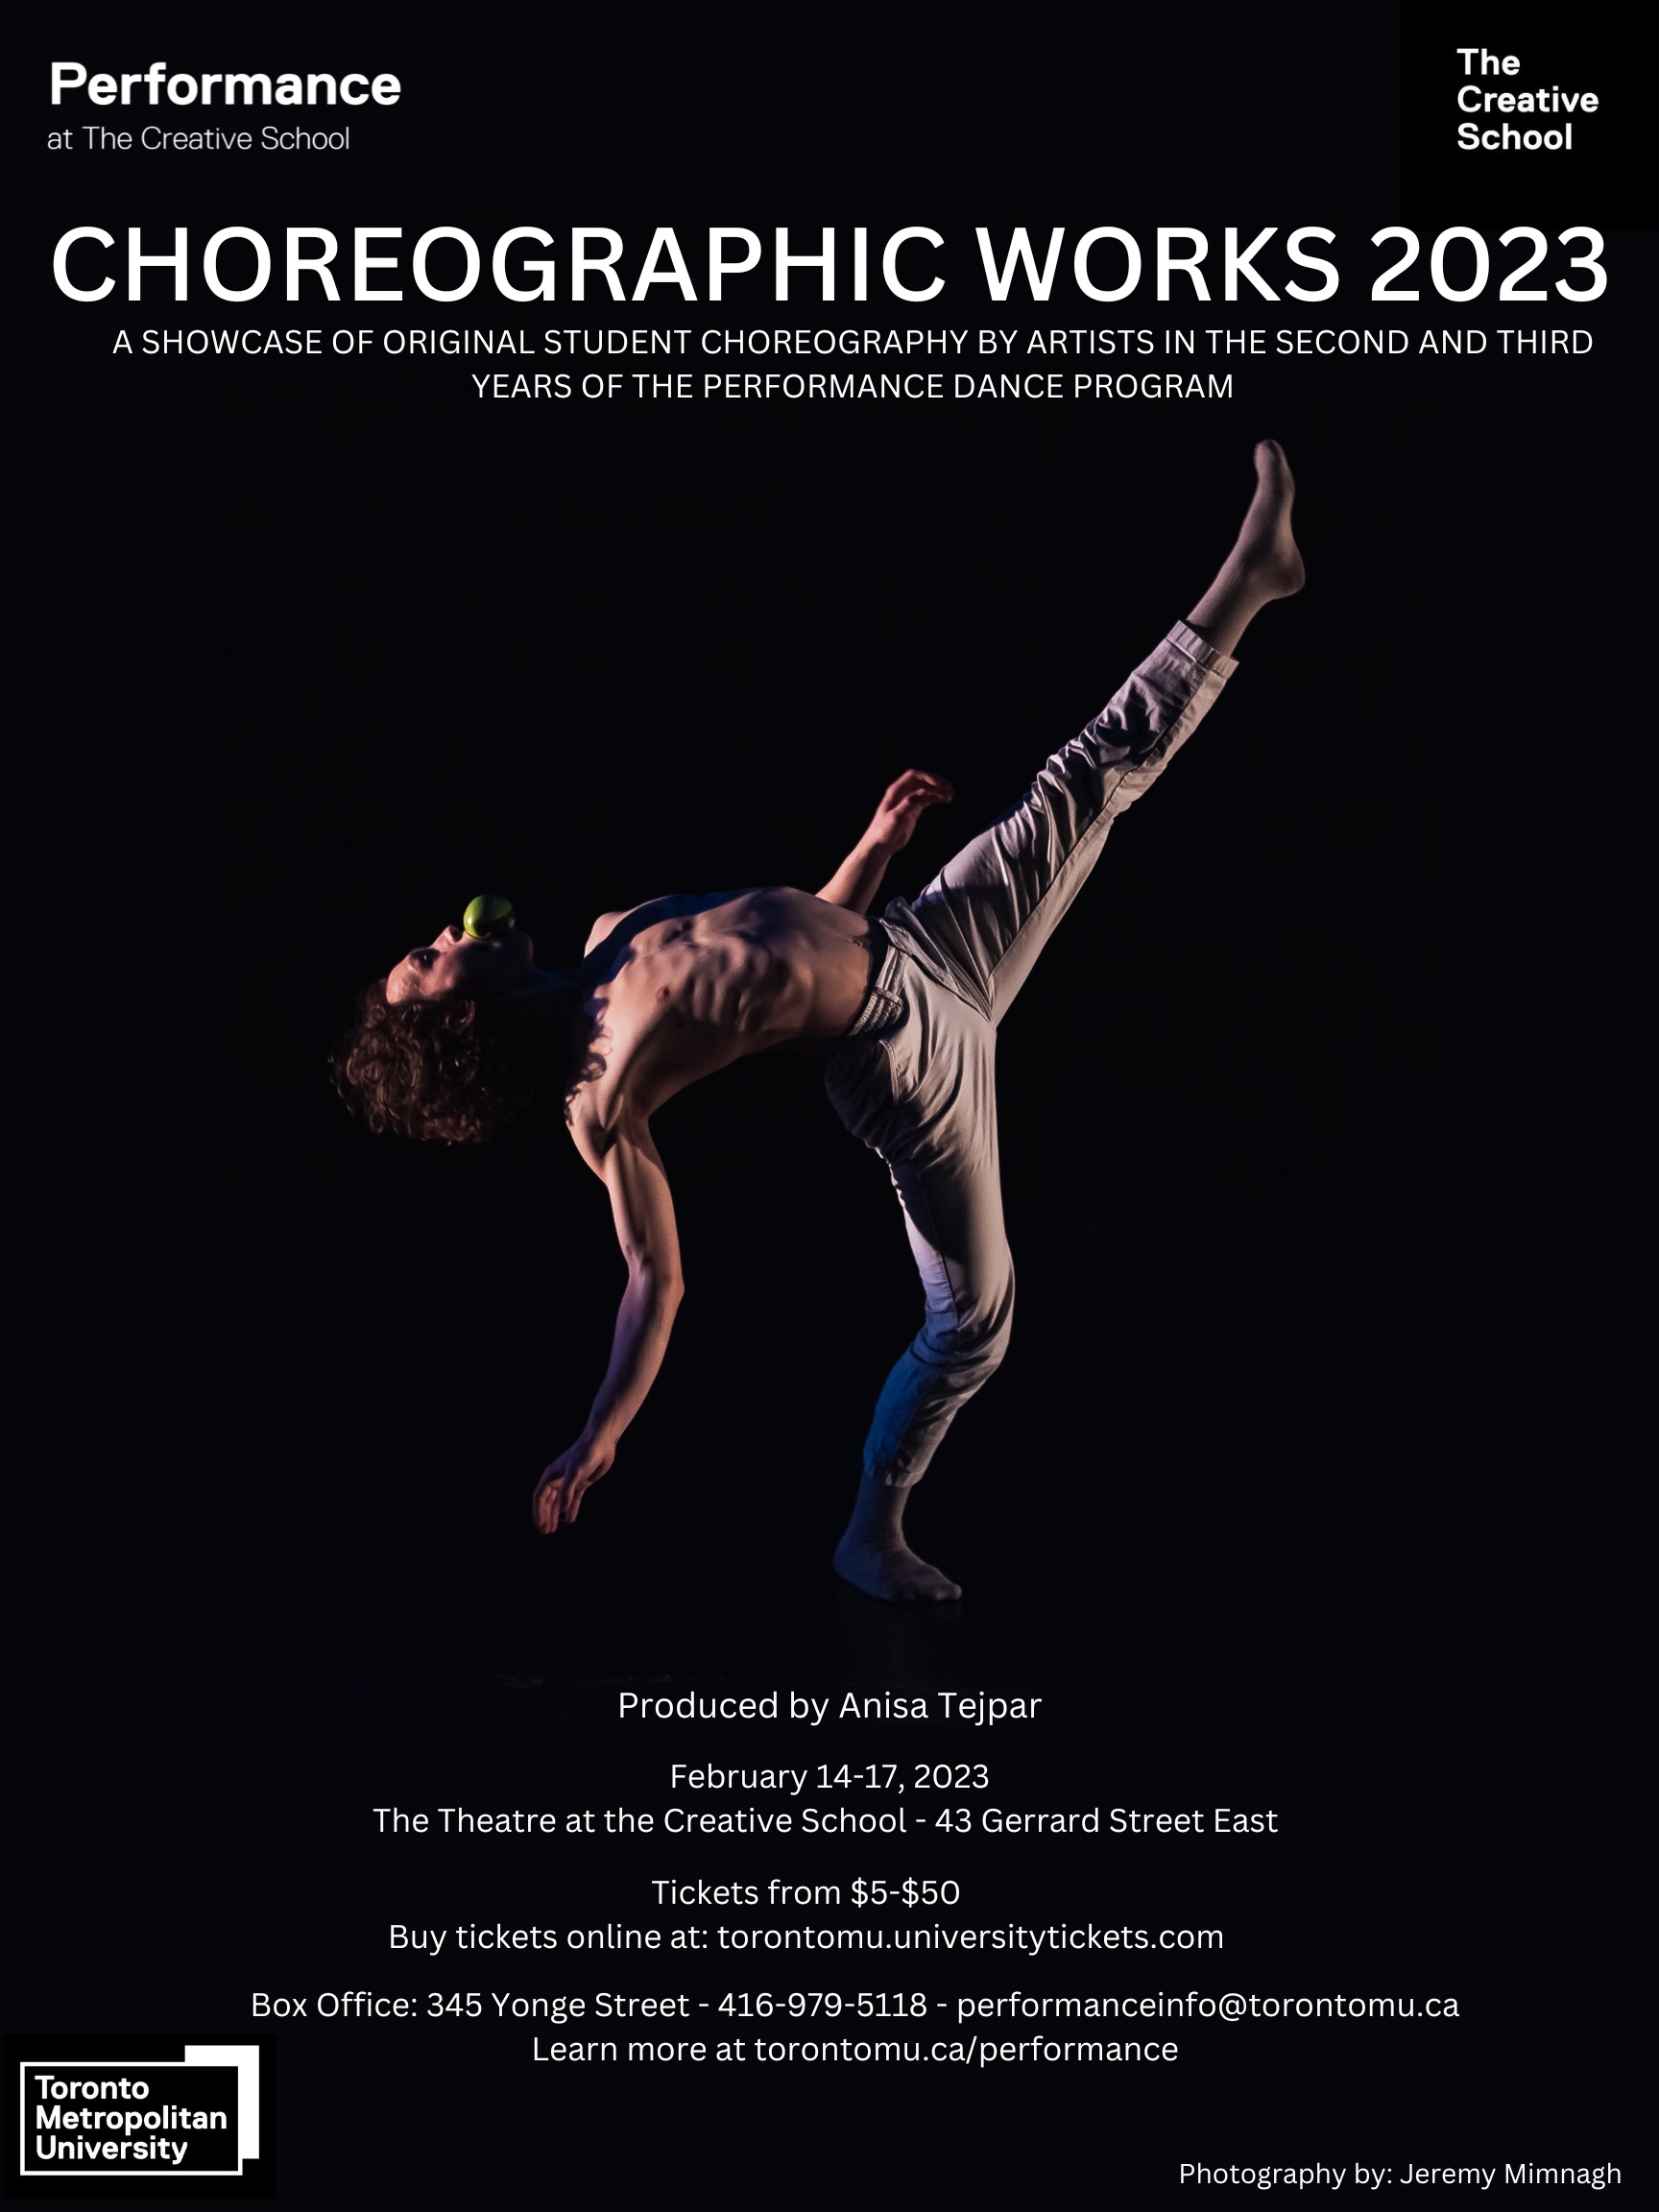 show poster for Choreographic Works 2023. Black background with image of a male dancer kicking his leg into the air, he wears no shirt and holds an apple in his mouth